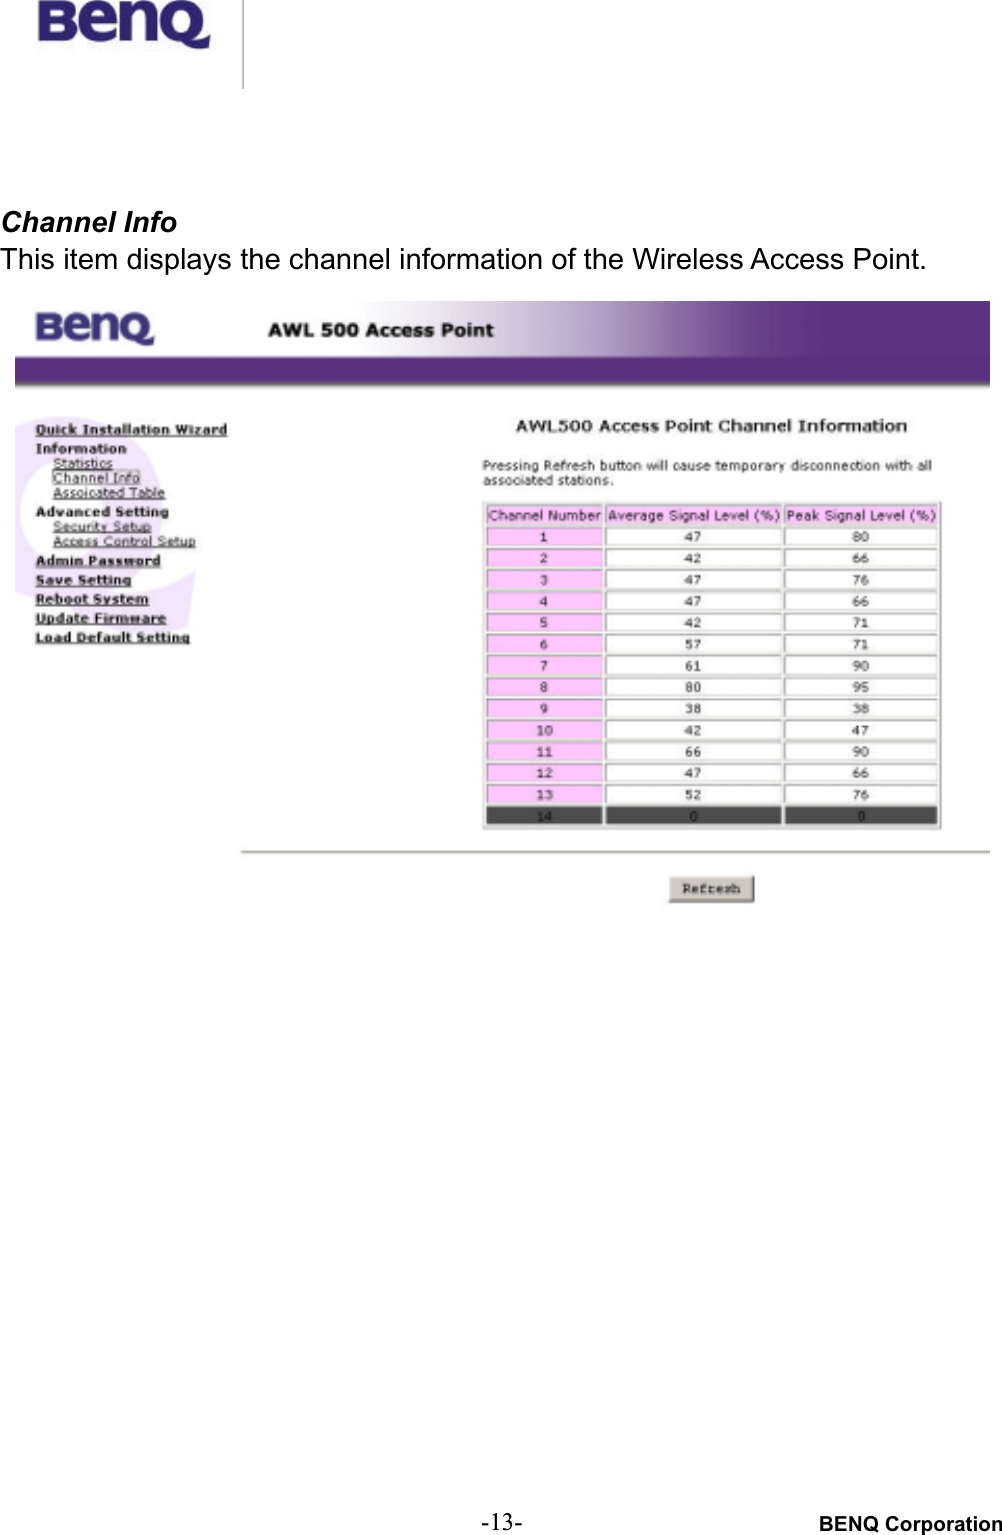 BENQ Corporation-13-Channel InfoThis item displays the channel information of the Wireless Access Point.